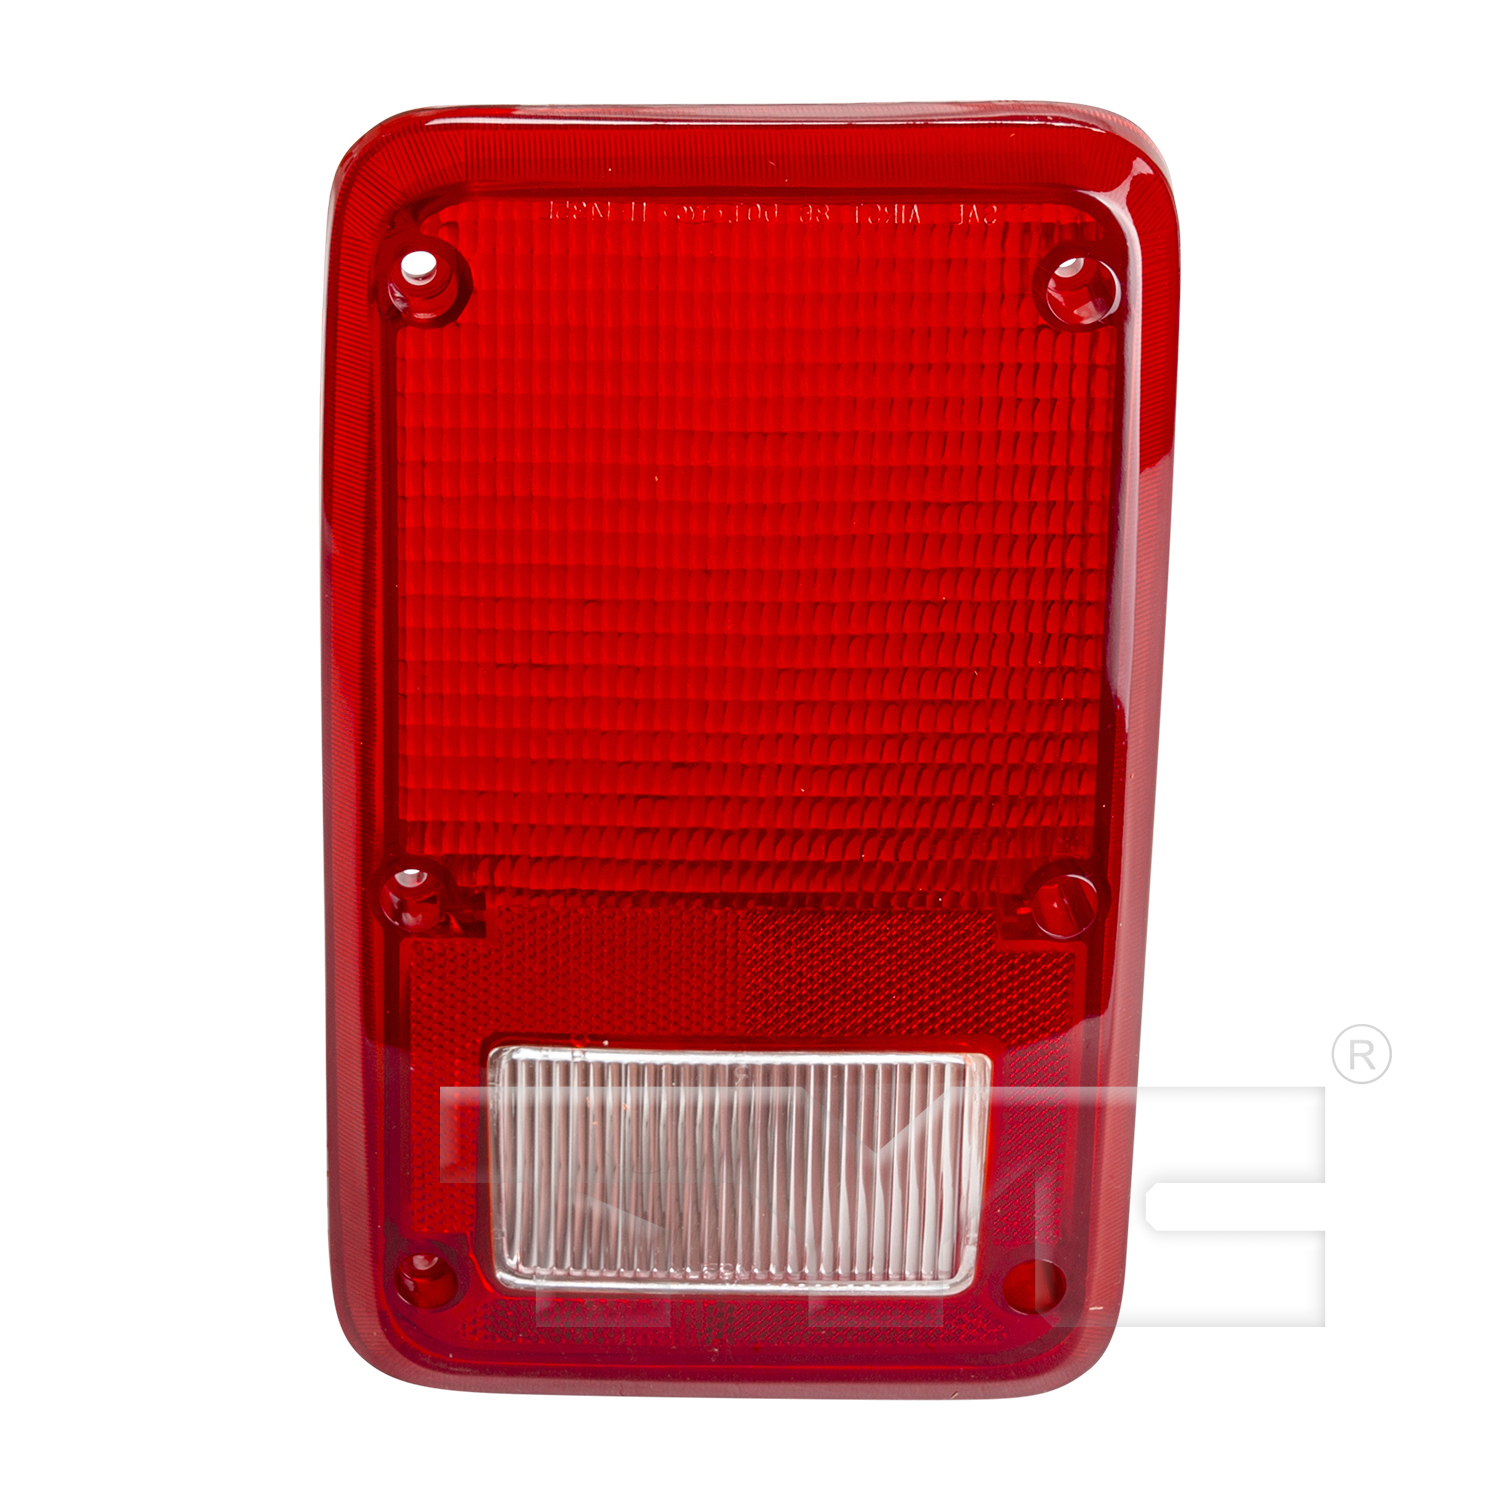 Aftermarket TAILLIGHTS for DODGE - B200, B200,78-80,LT Taillamp lens